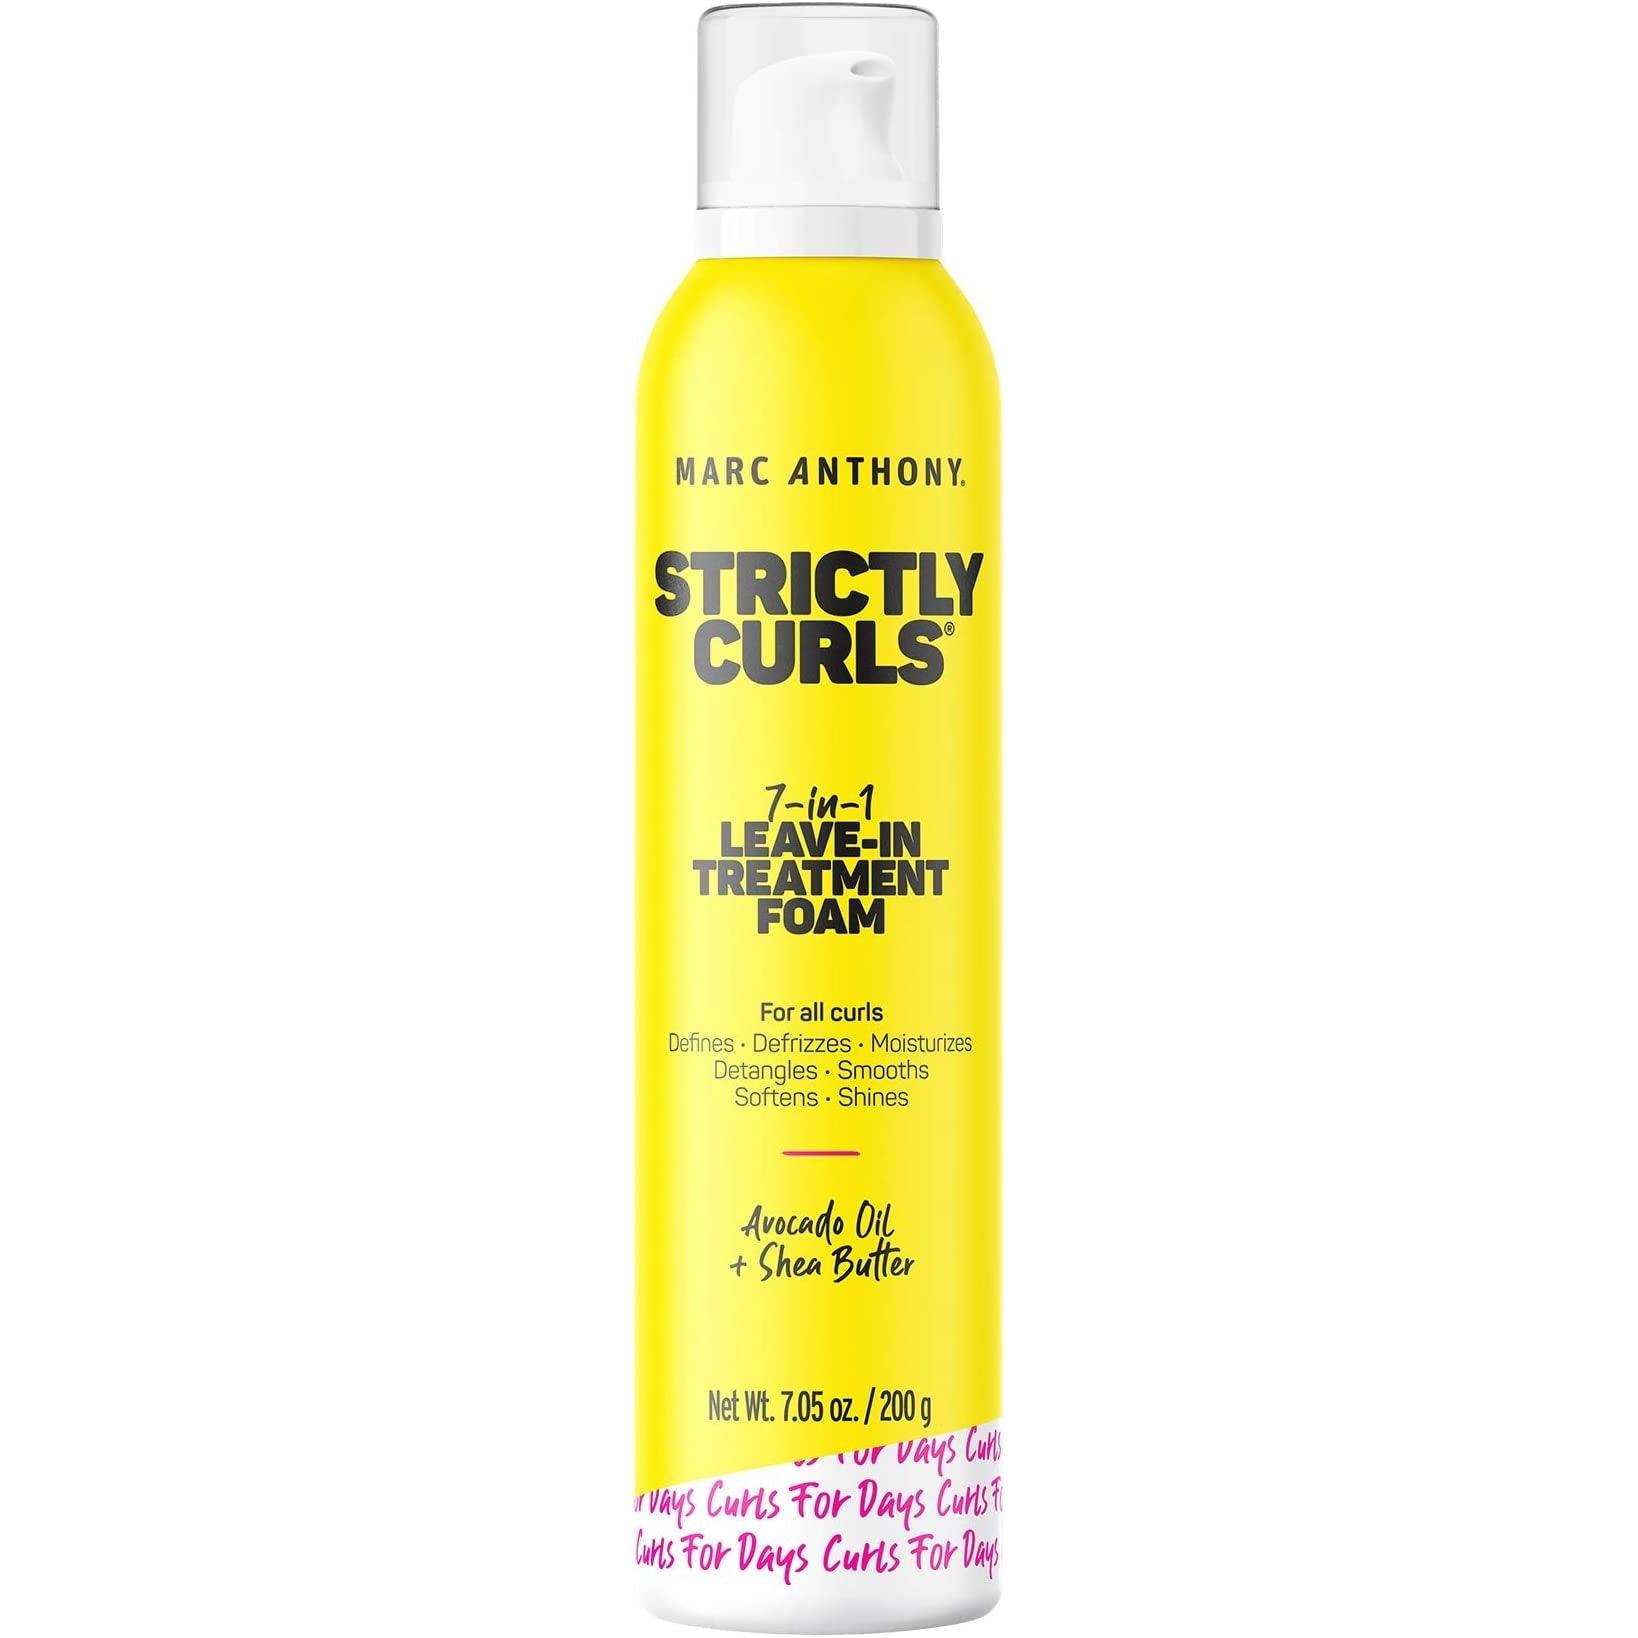 Marc Anthony Strictly Curls Perfect Curl 7 in 1 Leave-in Treatment Foam 7.1oz - African Beauty Online